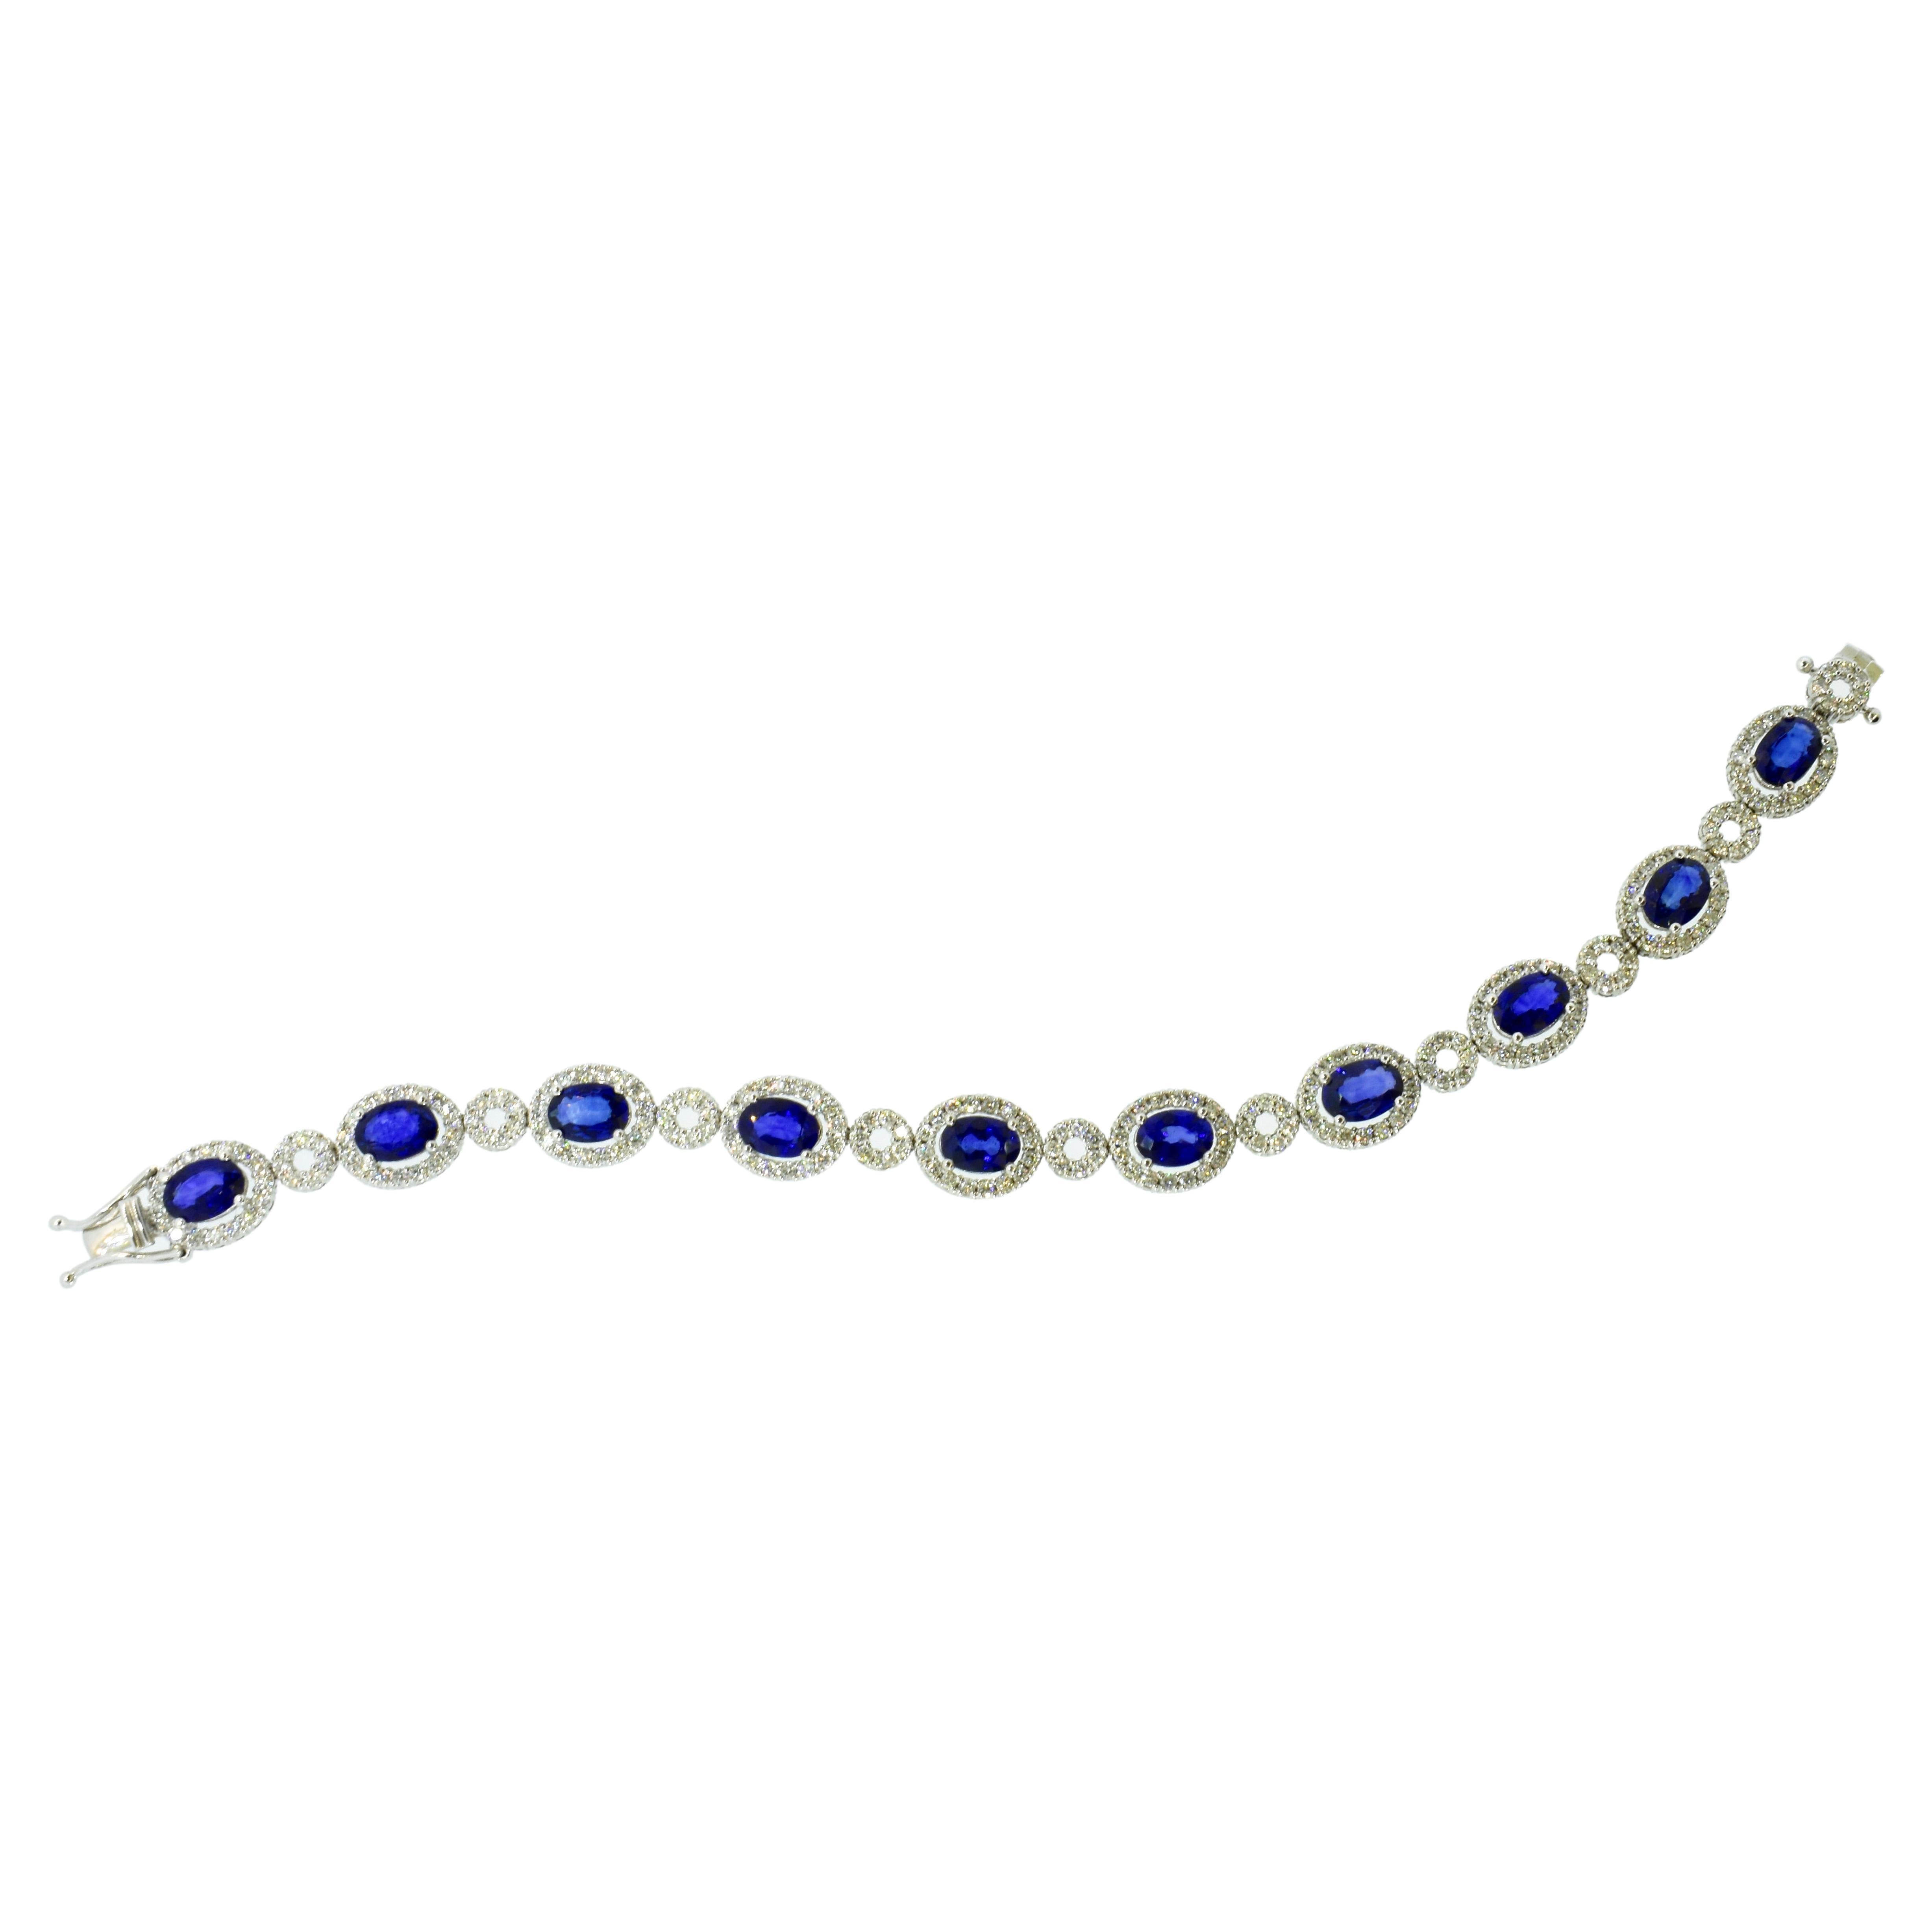 Diamond and natural sapphire contemporary bracelet.  This well made white gold bracelet possesses 10 fine natural vivid blue oval sapphires.  These stones exhibit a clear blue color with no undesirable undertones - such as green, and the clarity is